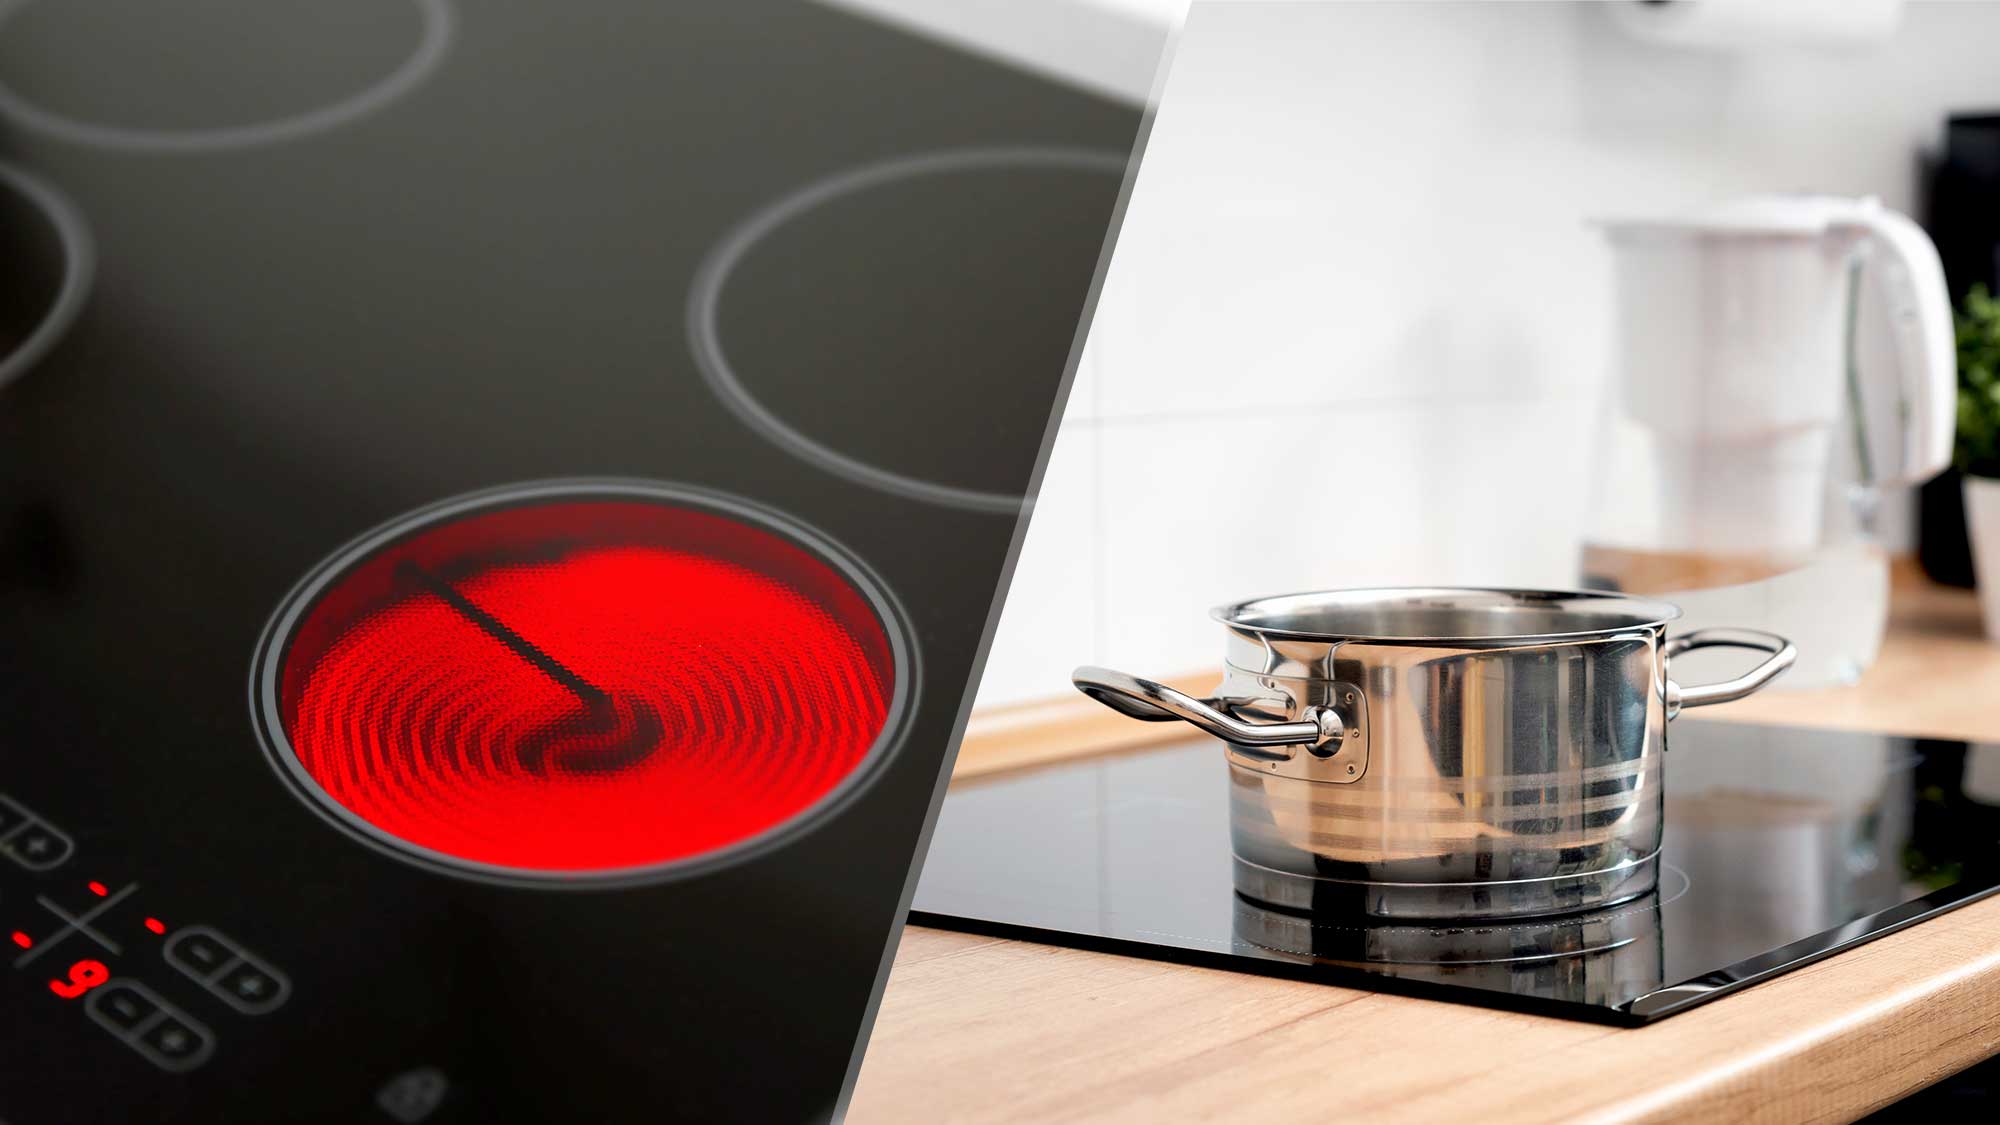 What Is An Induction Cooktop Vs Electric Cooktop?